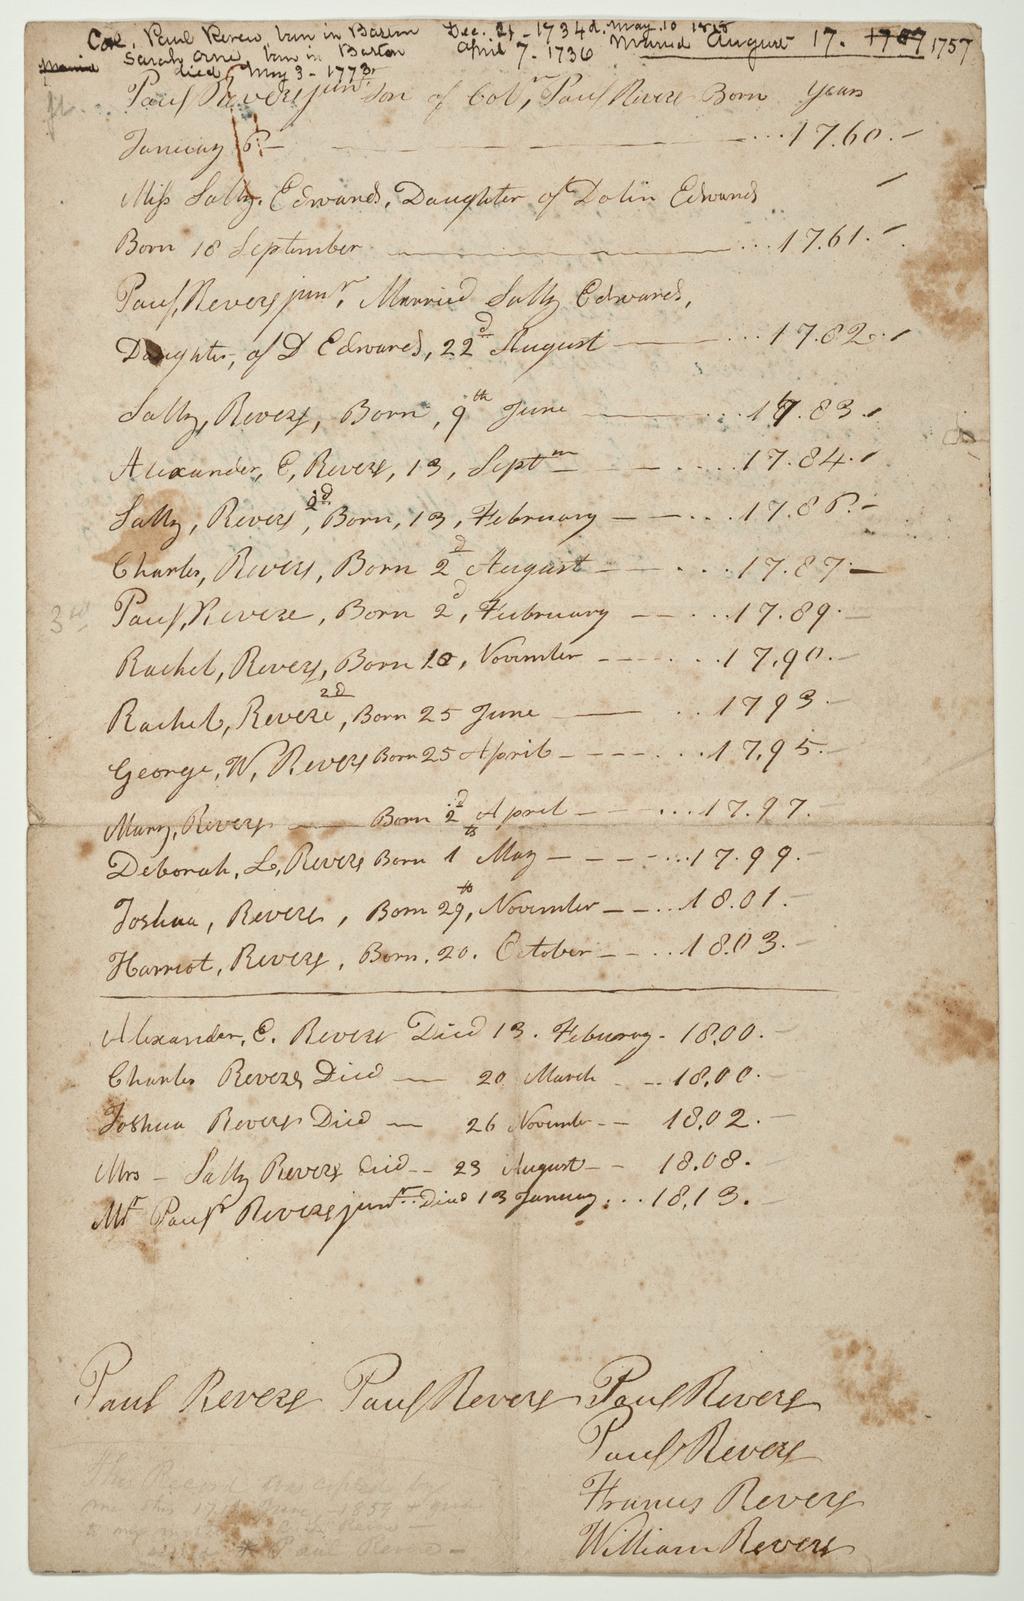 Paul Revere (b. 1789) son of Paul Revere Jr. and Sally Edwards pens the family records from memory.